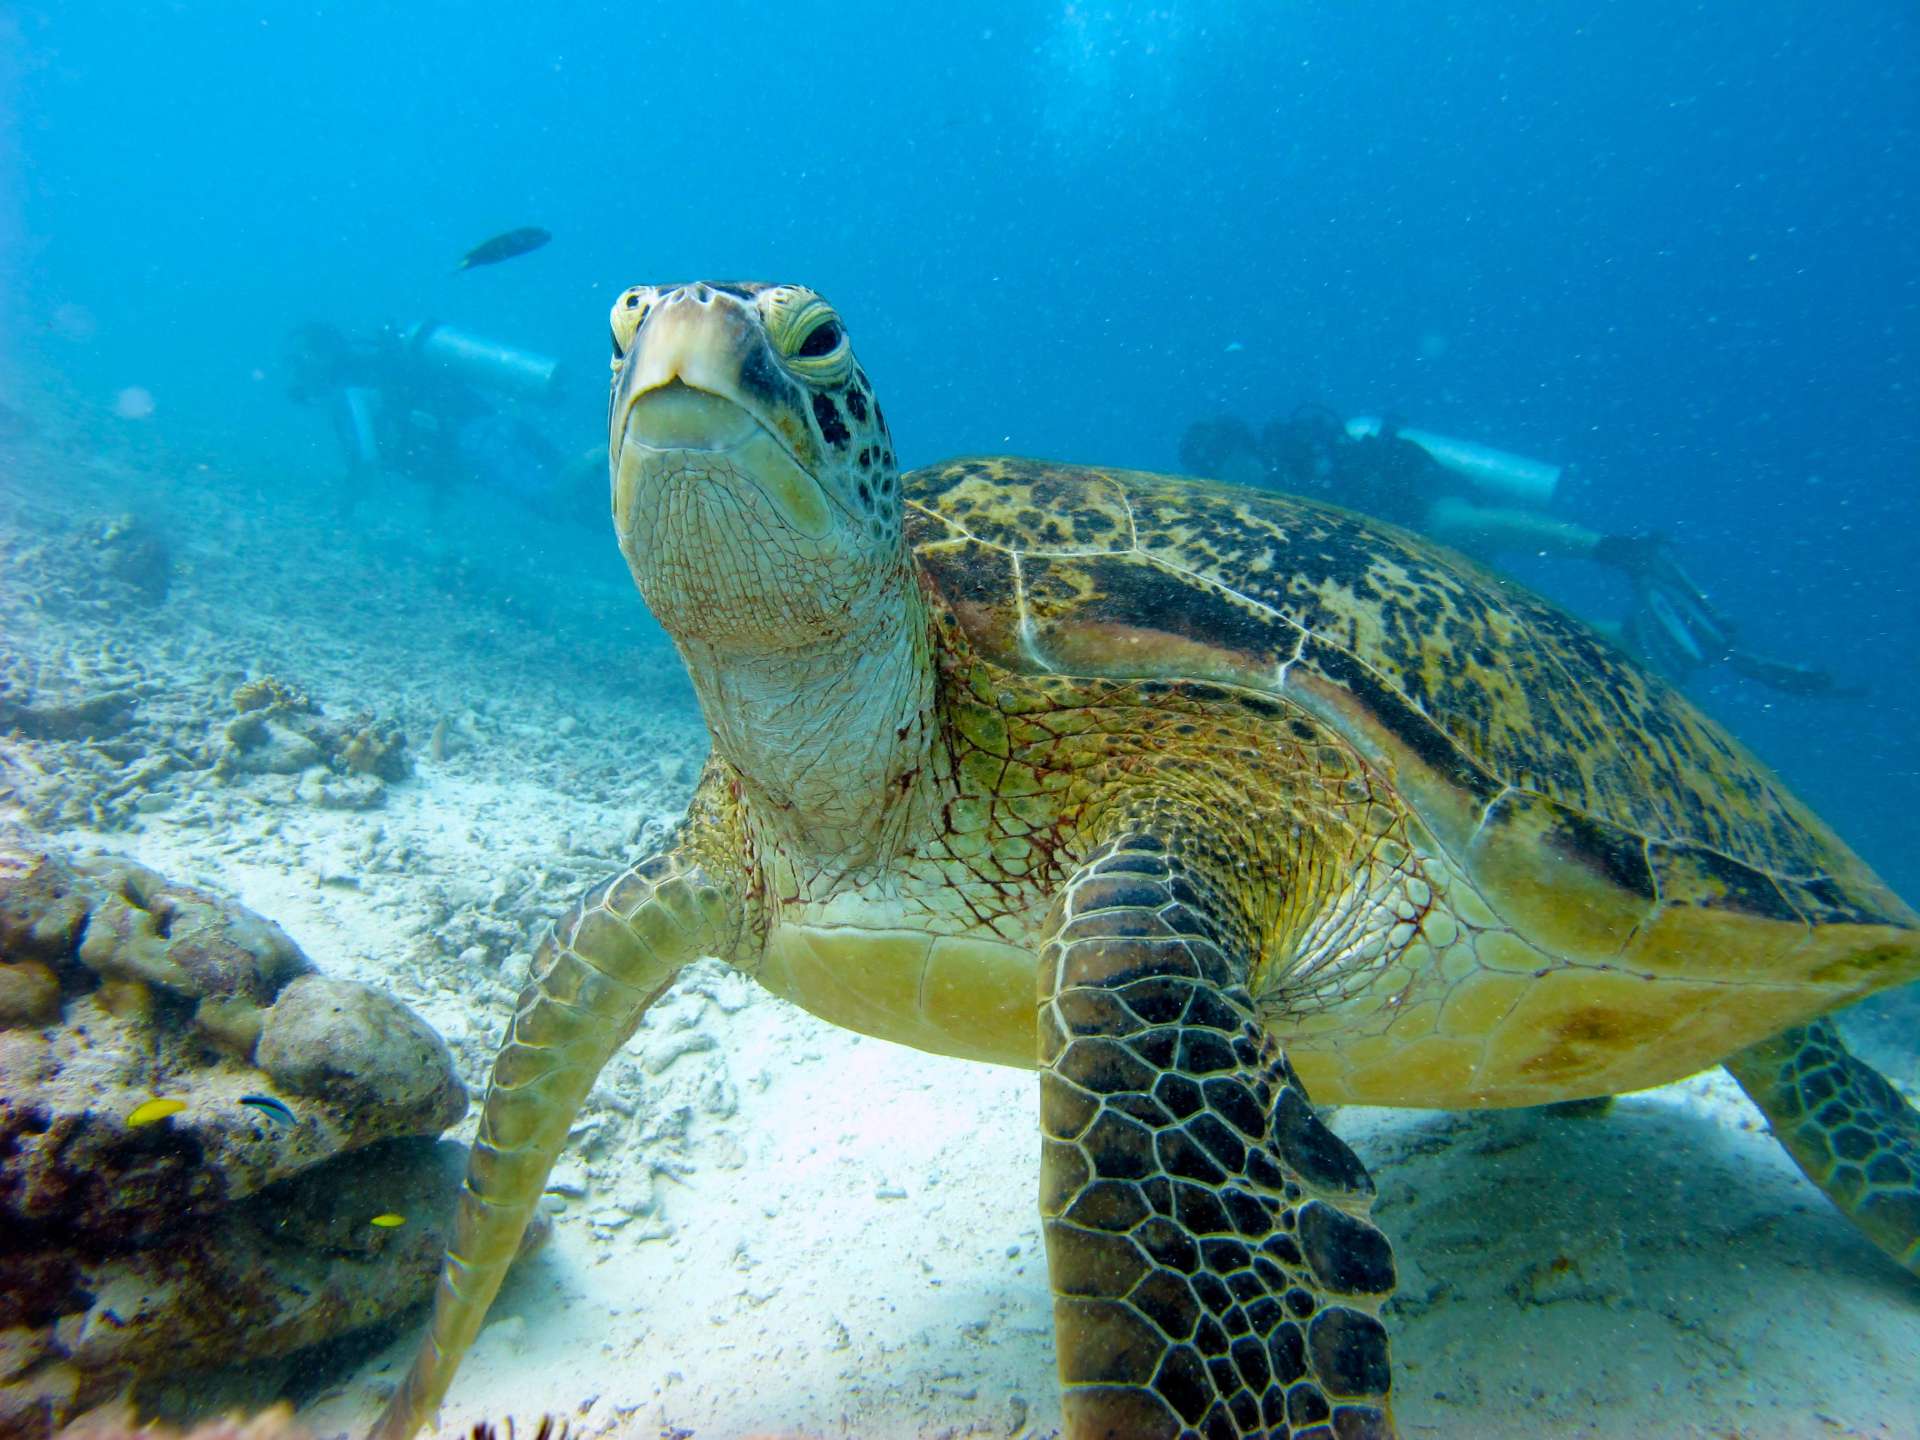 Green Turtle pictured up close by divers during a dive